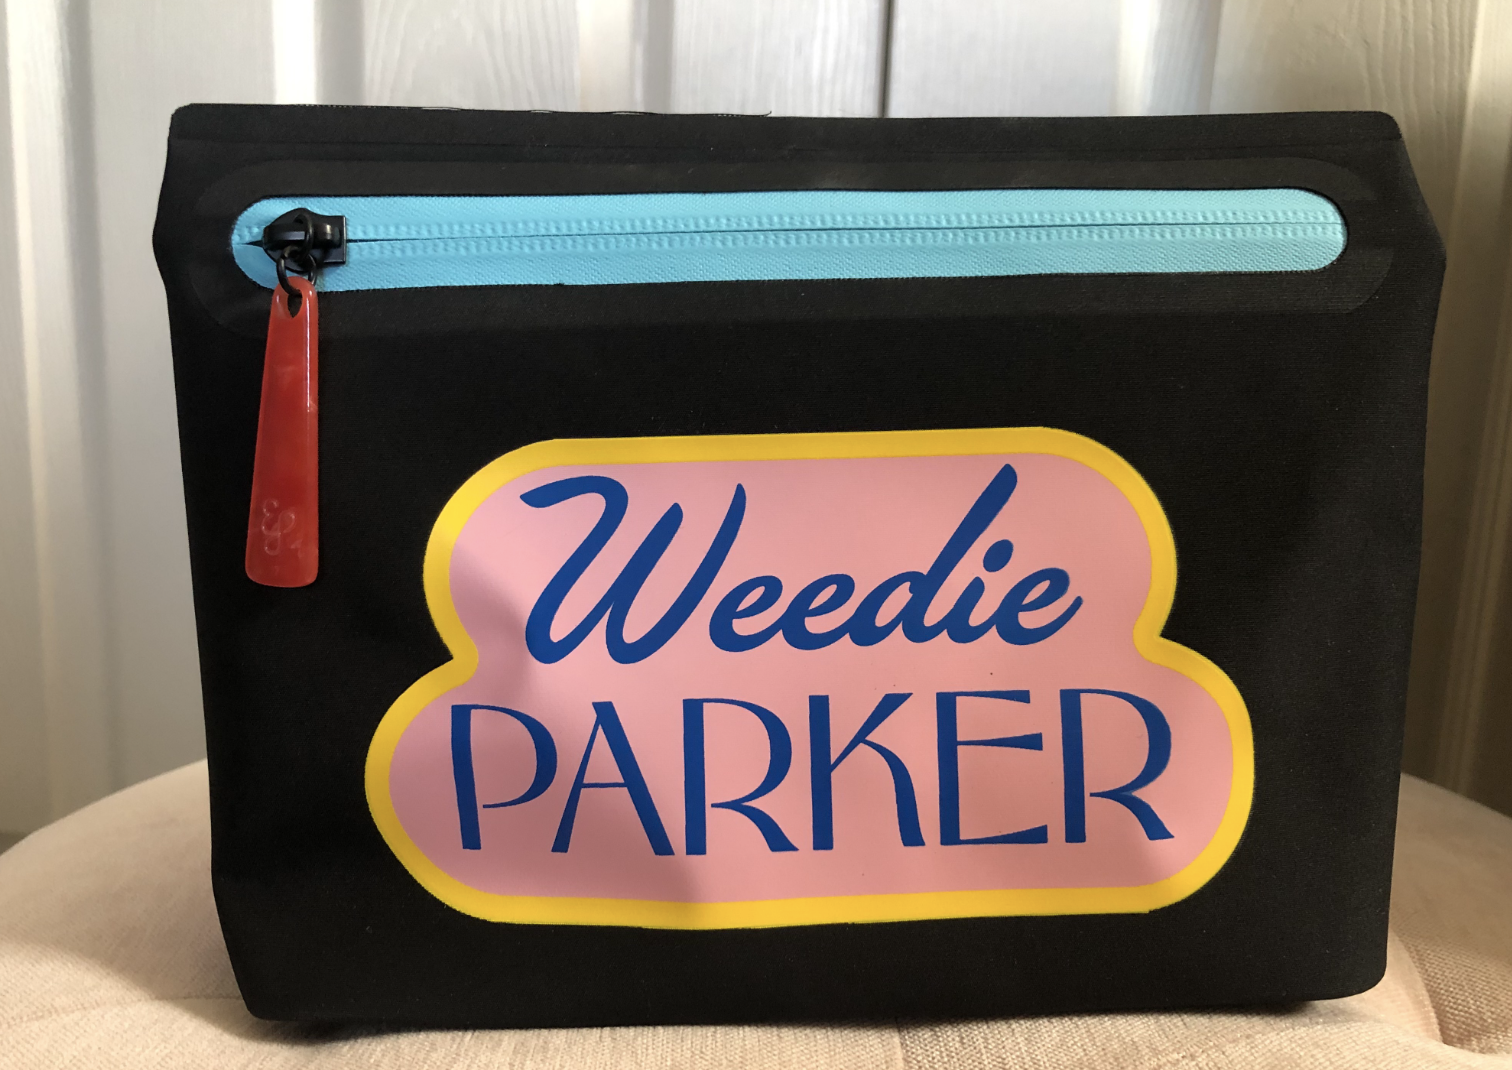 The &quot;weedie parker&quot; smell-proof pouch